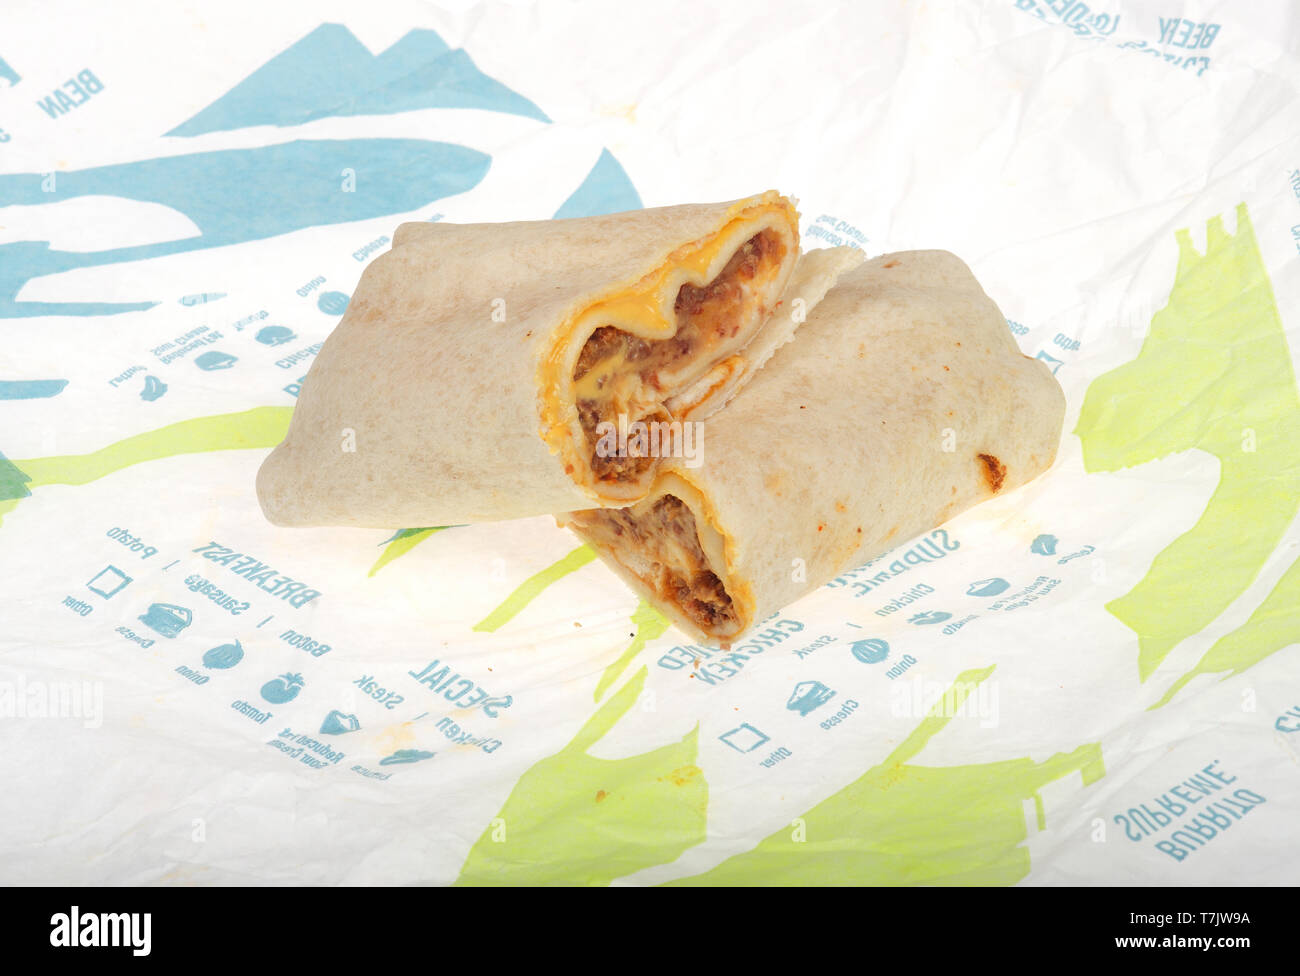 Taco Bell beefy 5 layer burrito with cheese cut in half on wrapper Stock Photo